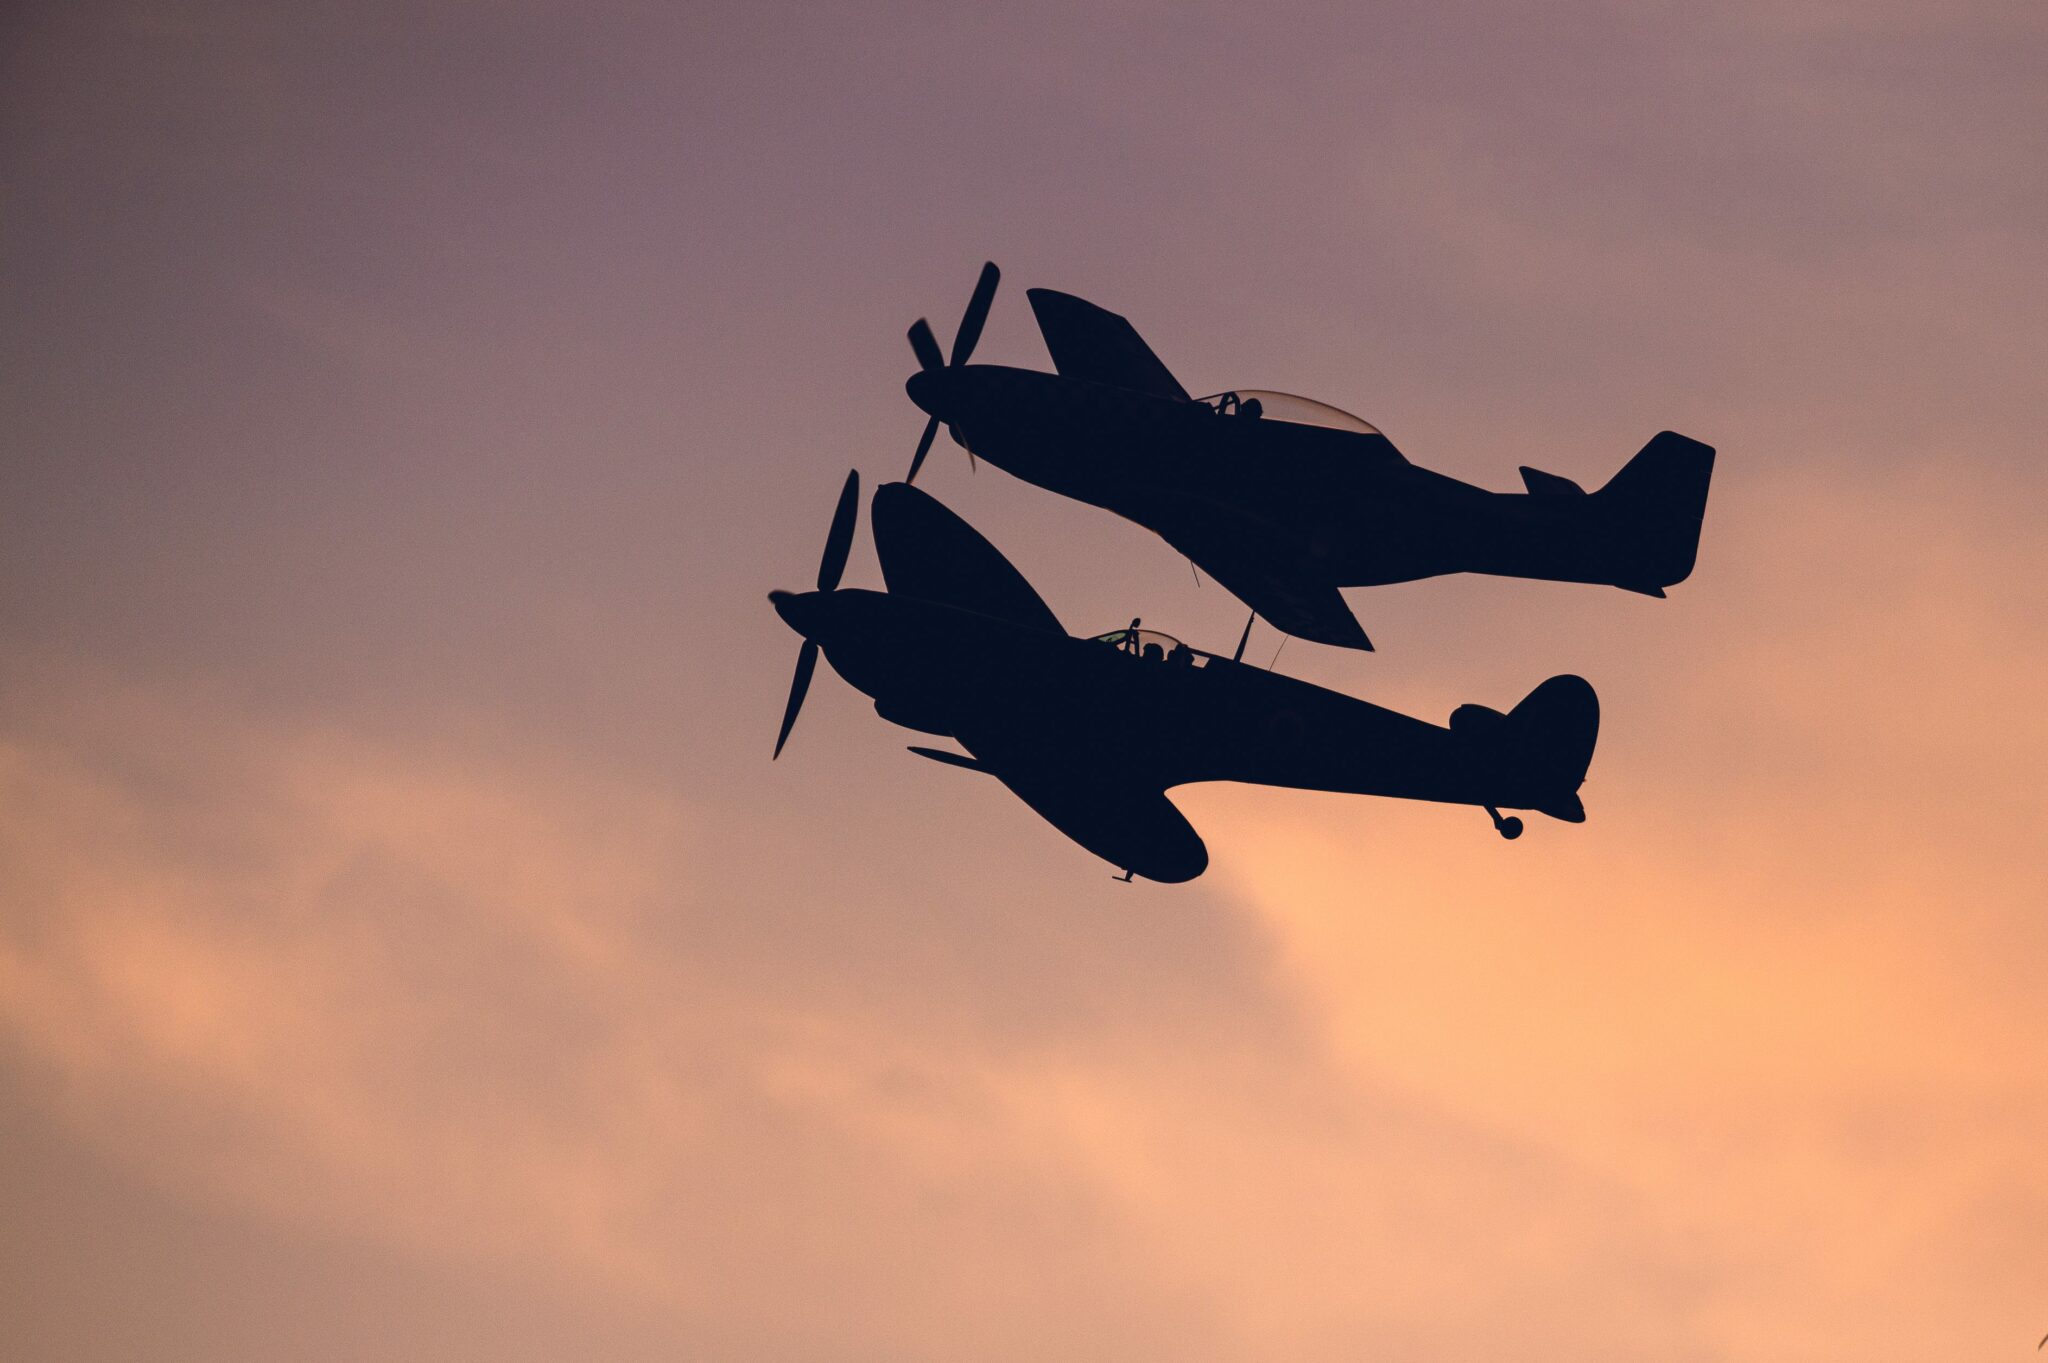 Aircraft flying at sunset over Goodwood